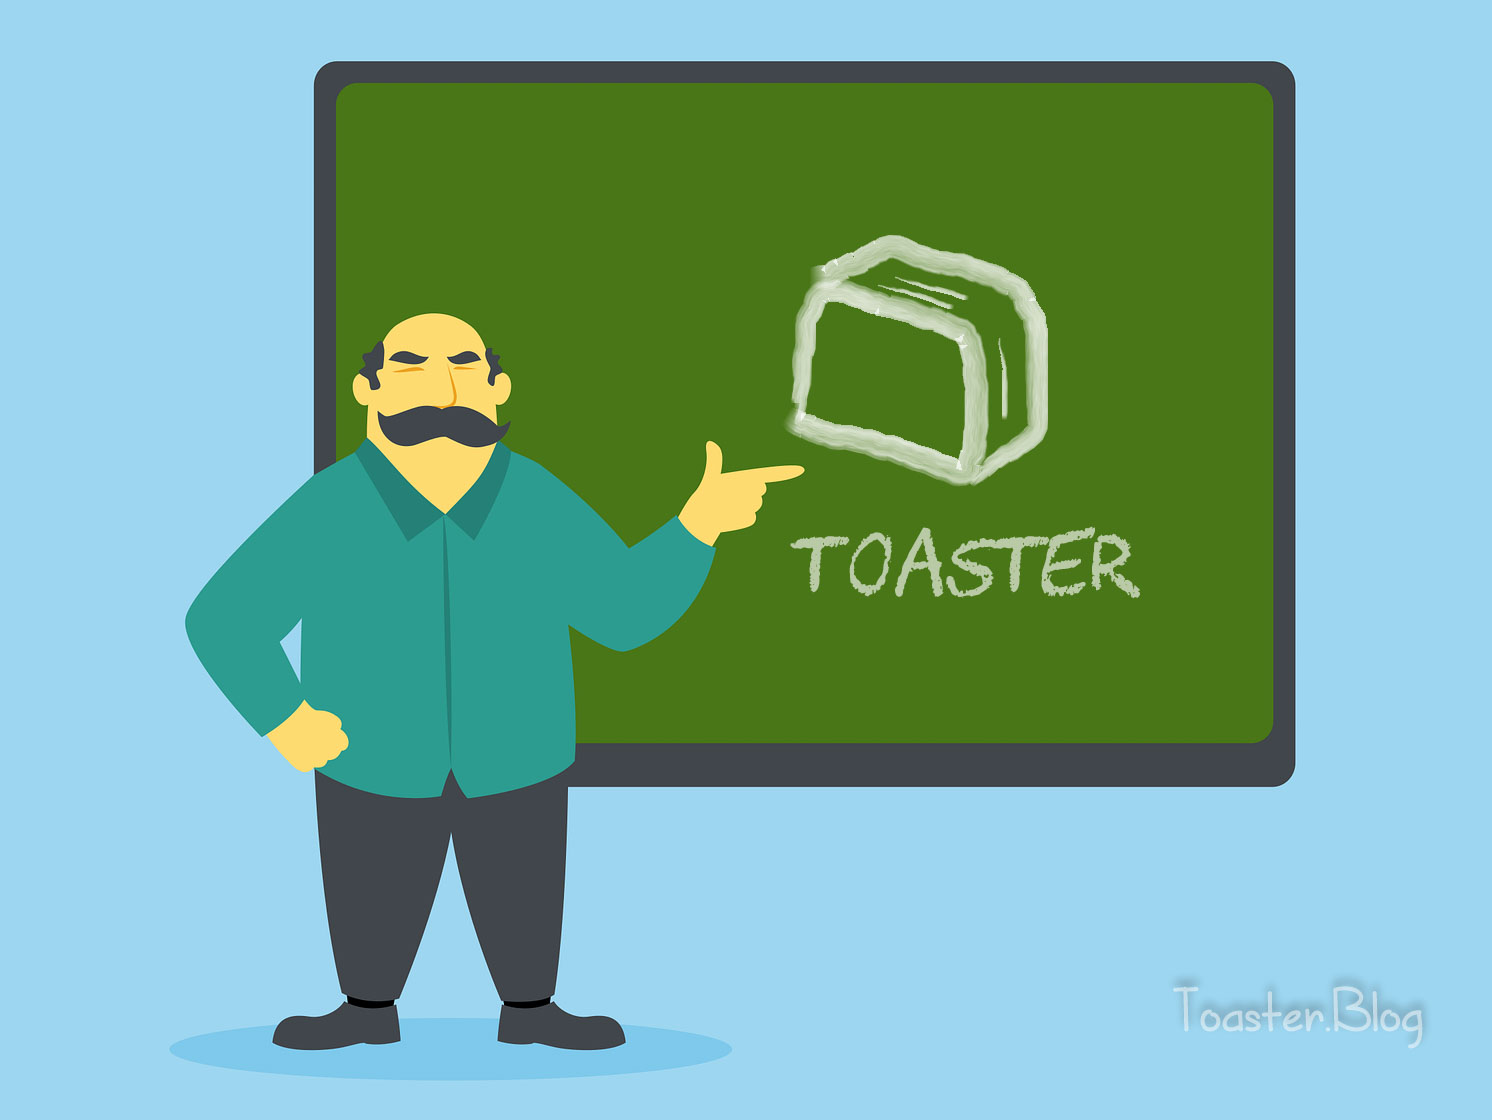 Toaster definition